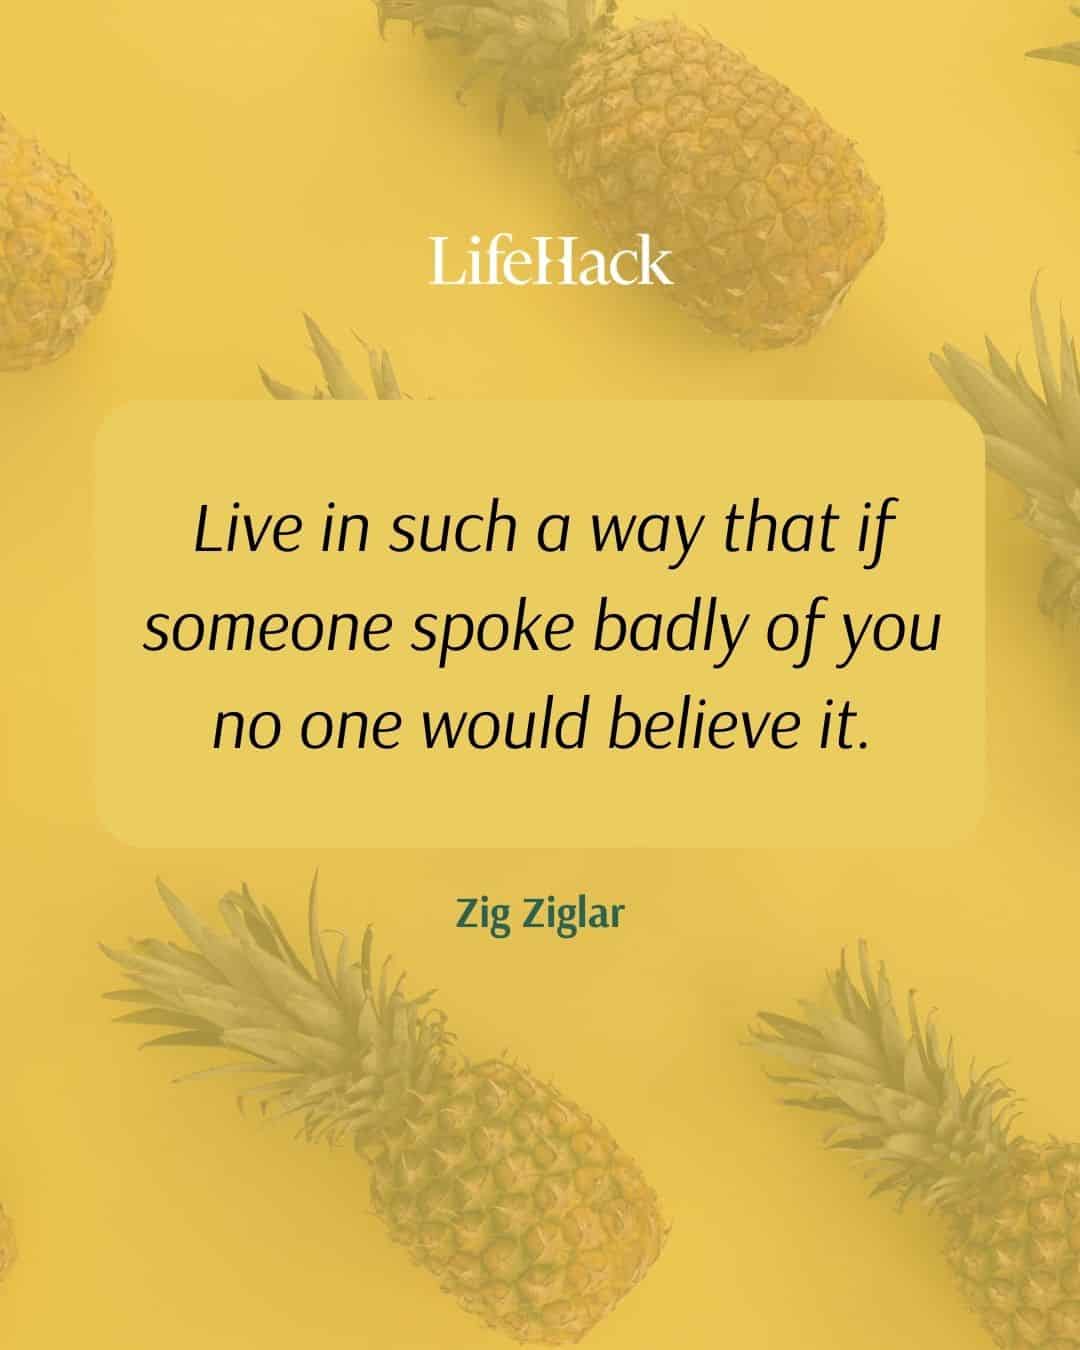 113 Famous Quotes About Life That Will Inspire You